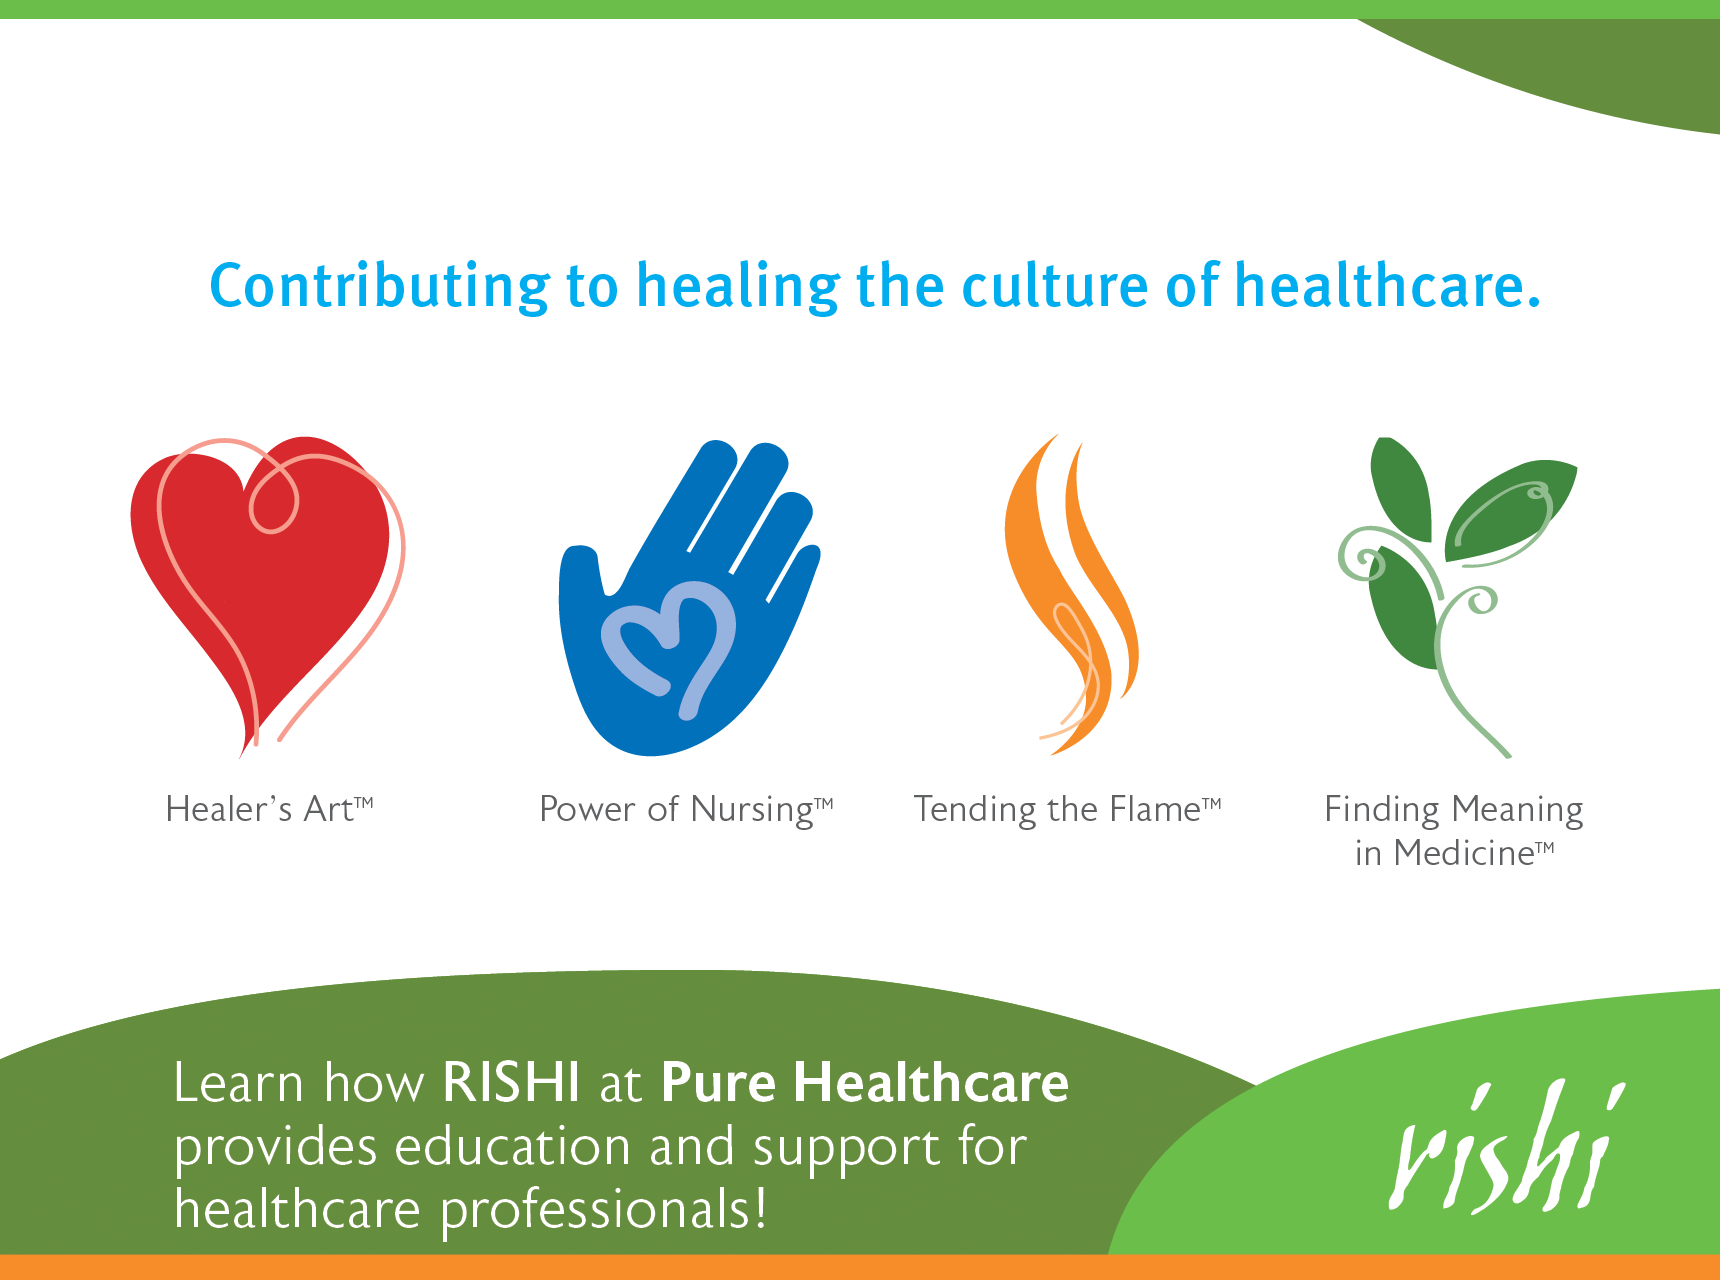 Learn more about RISHI at Pure Healthcare! | RISHI at Pure Healthcare